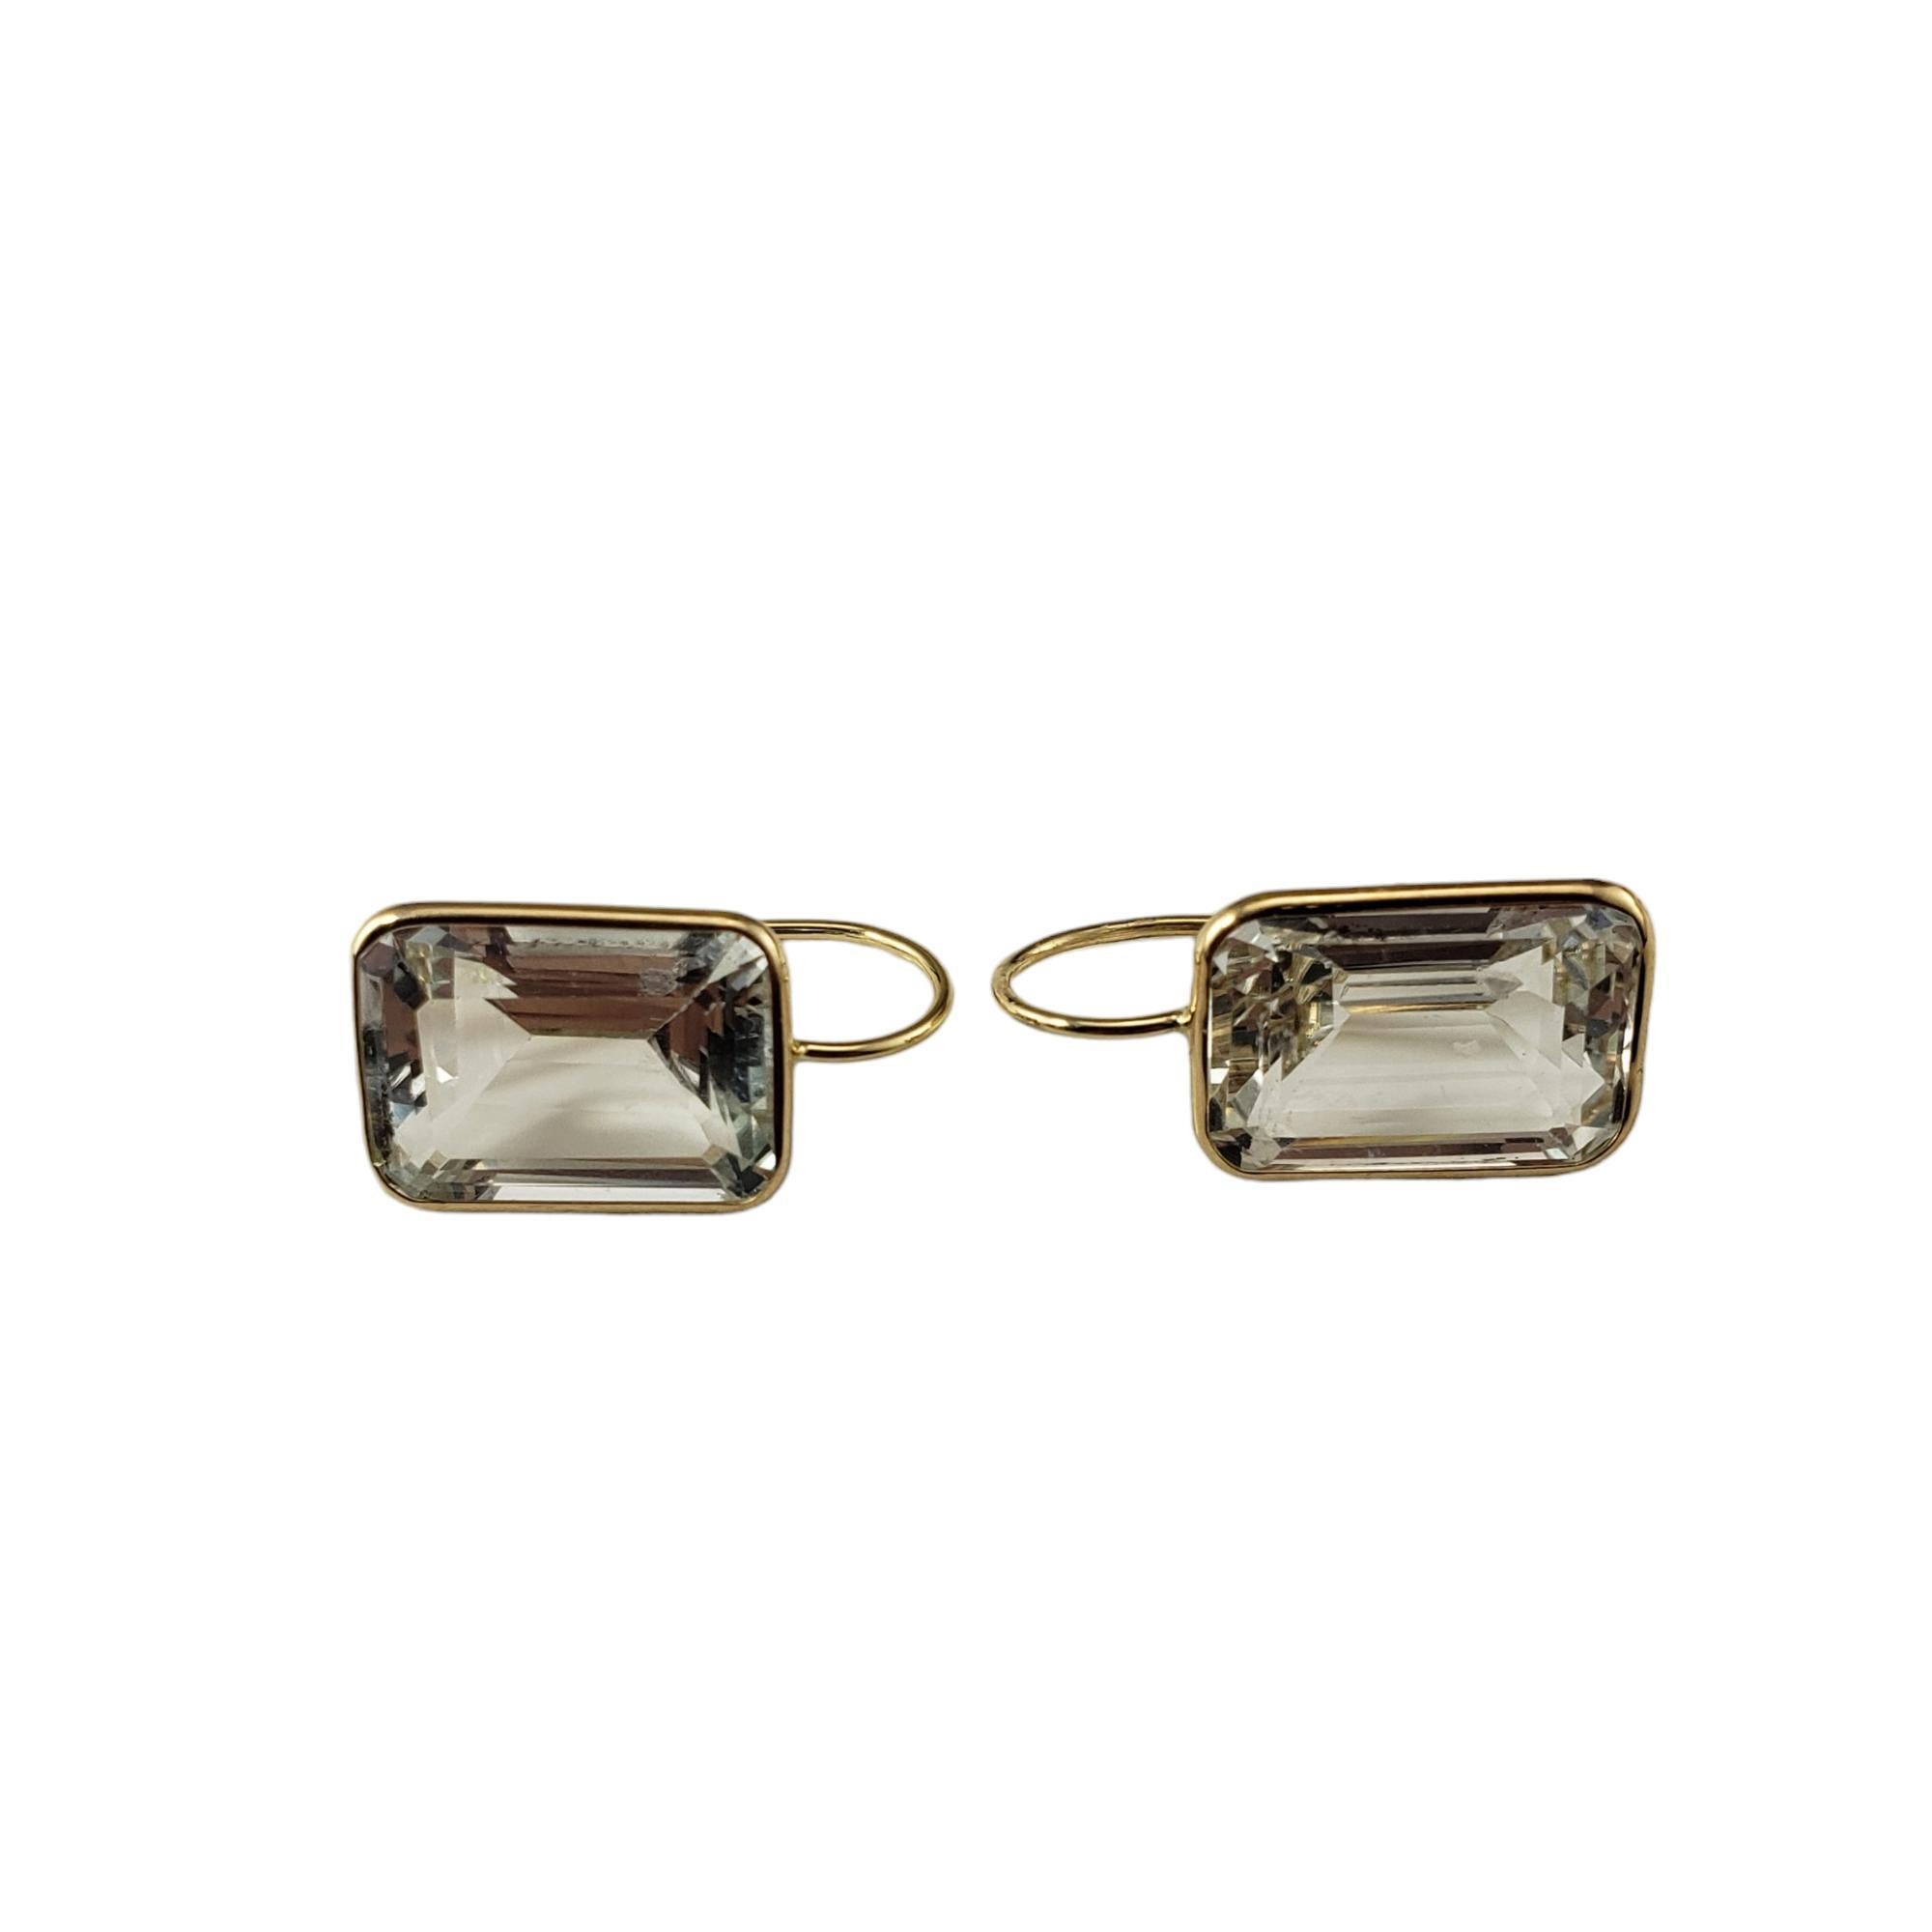 14 Karat Yellow Gold and White Topaz Earrings JAGi Certified

These stunning earrings each feature one emerald cut topaz (14 mm x 9.5 mm) set in classic 14K yellow gold.

Total topaz weight:  16.7 ct.

Size: 21.5 mm x 11 mm 

Stamped: 14K

Weight: